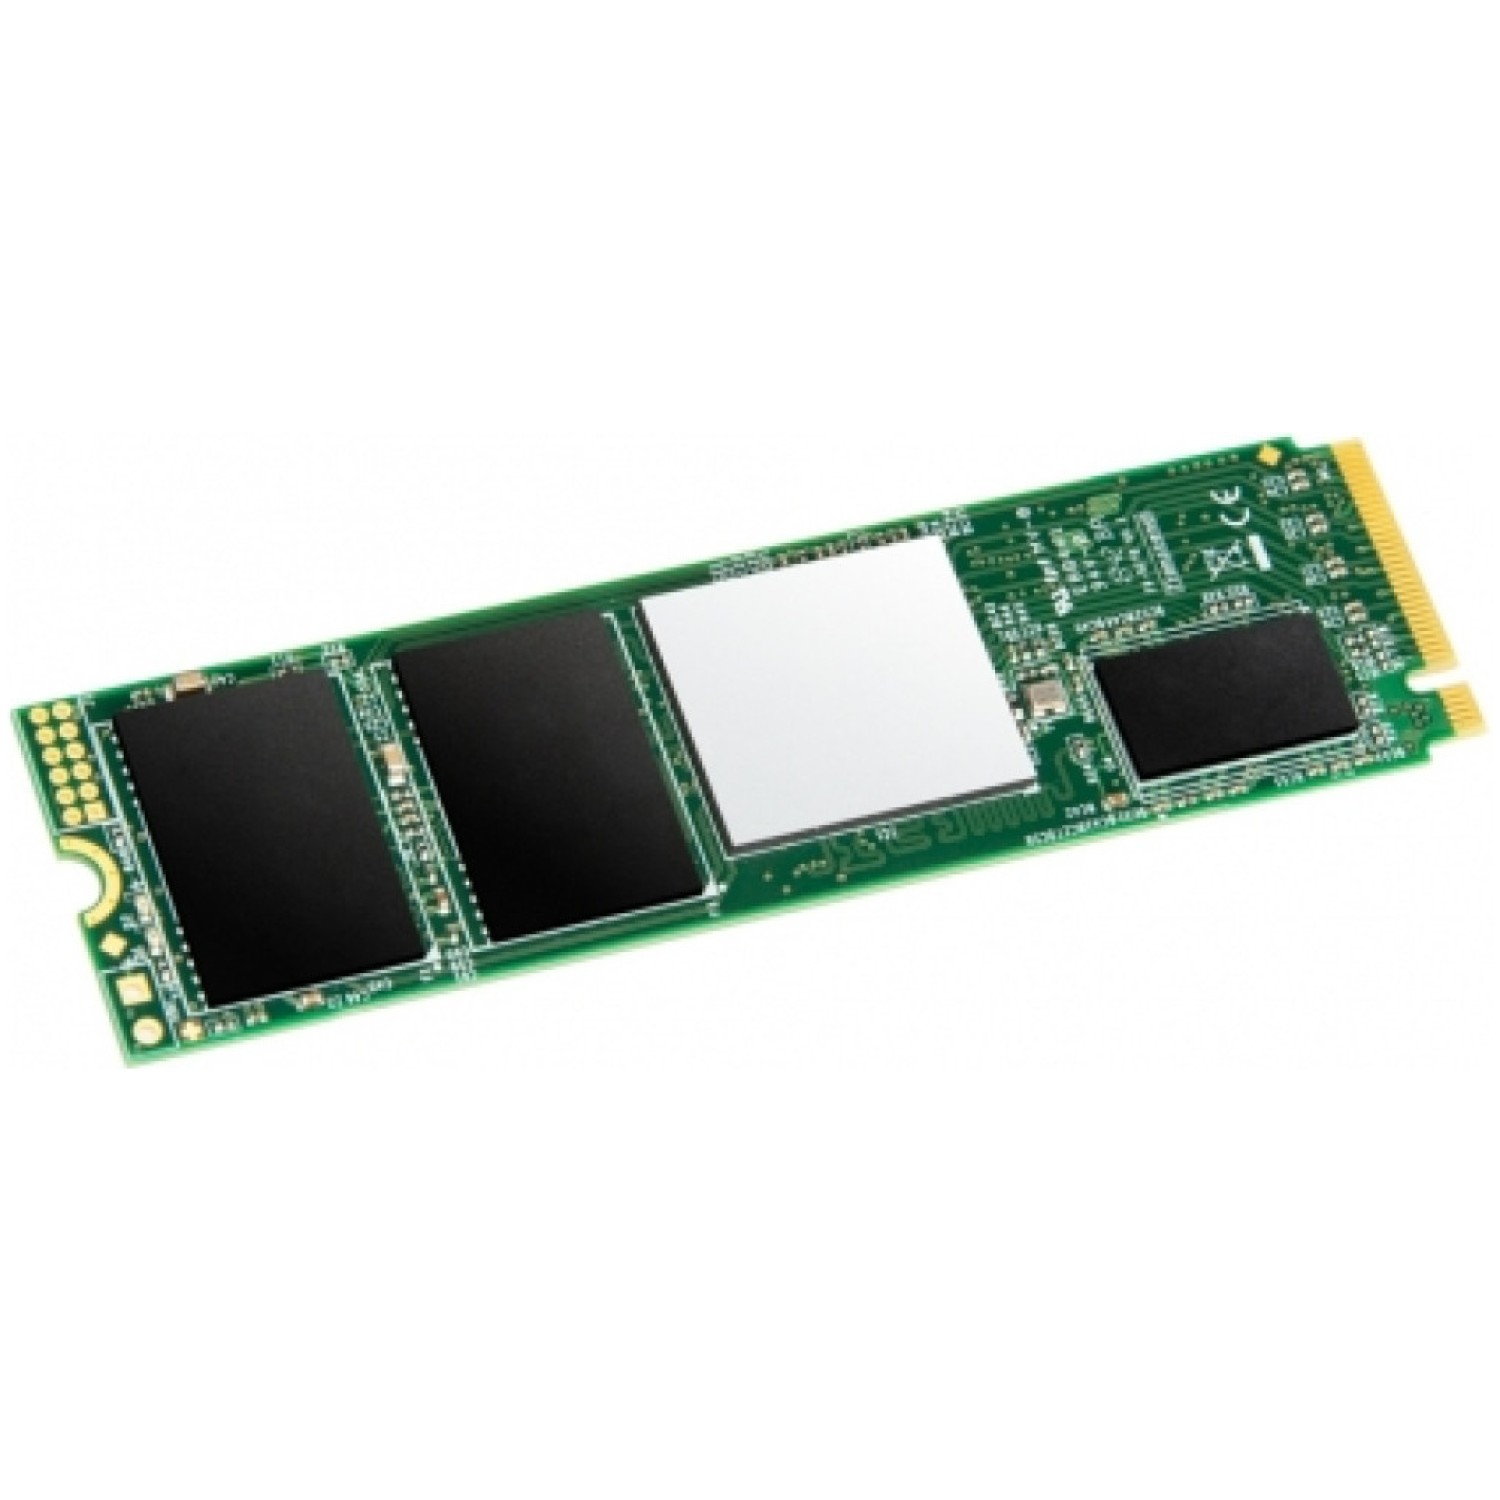 Disk SSD M.2 NVMe PCIe 3.0 512GB Transcend 220S 2280 3500/2800MB/s (TS512GMTE220S)